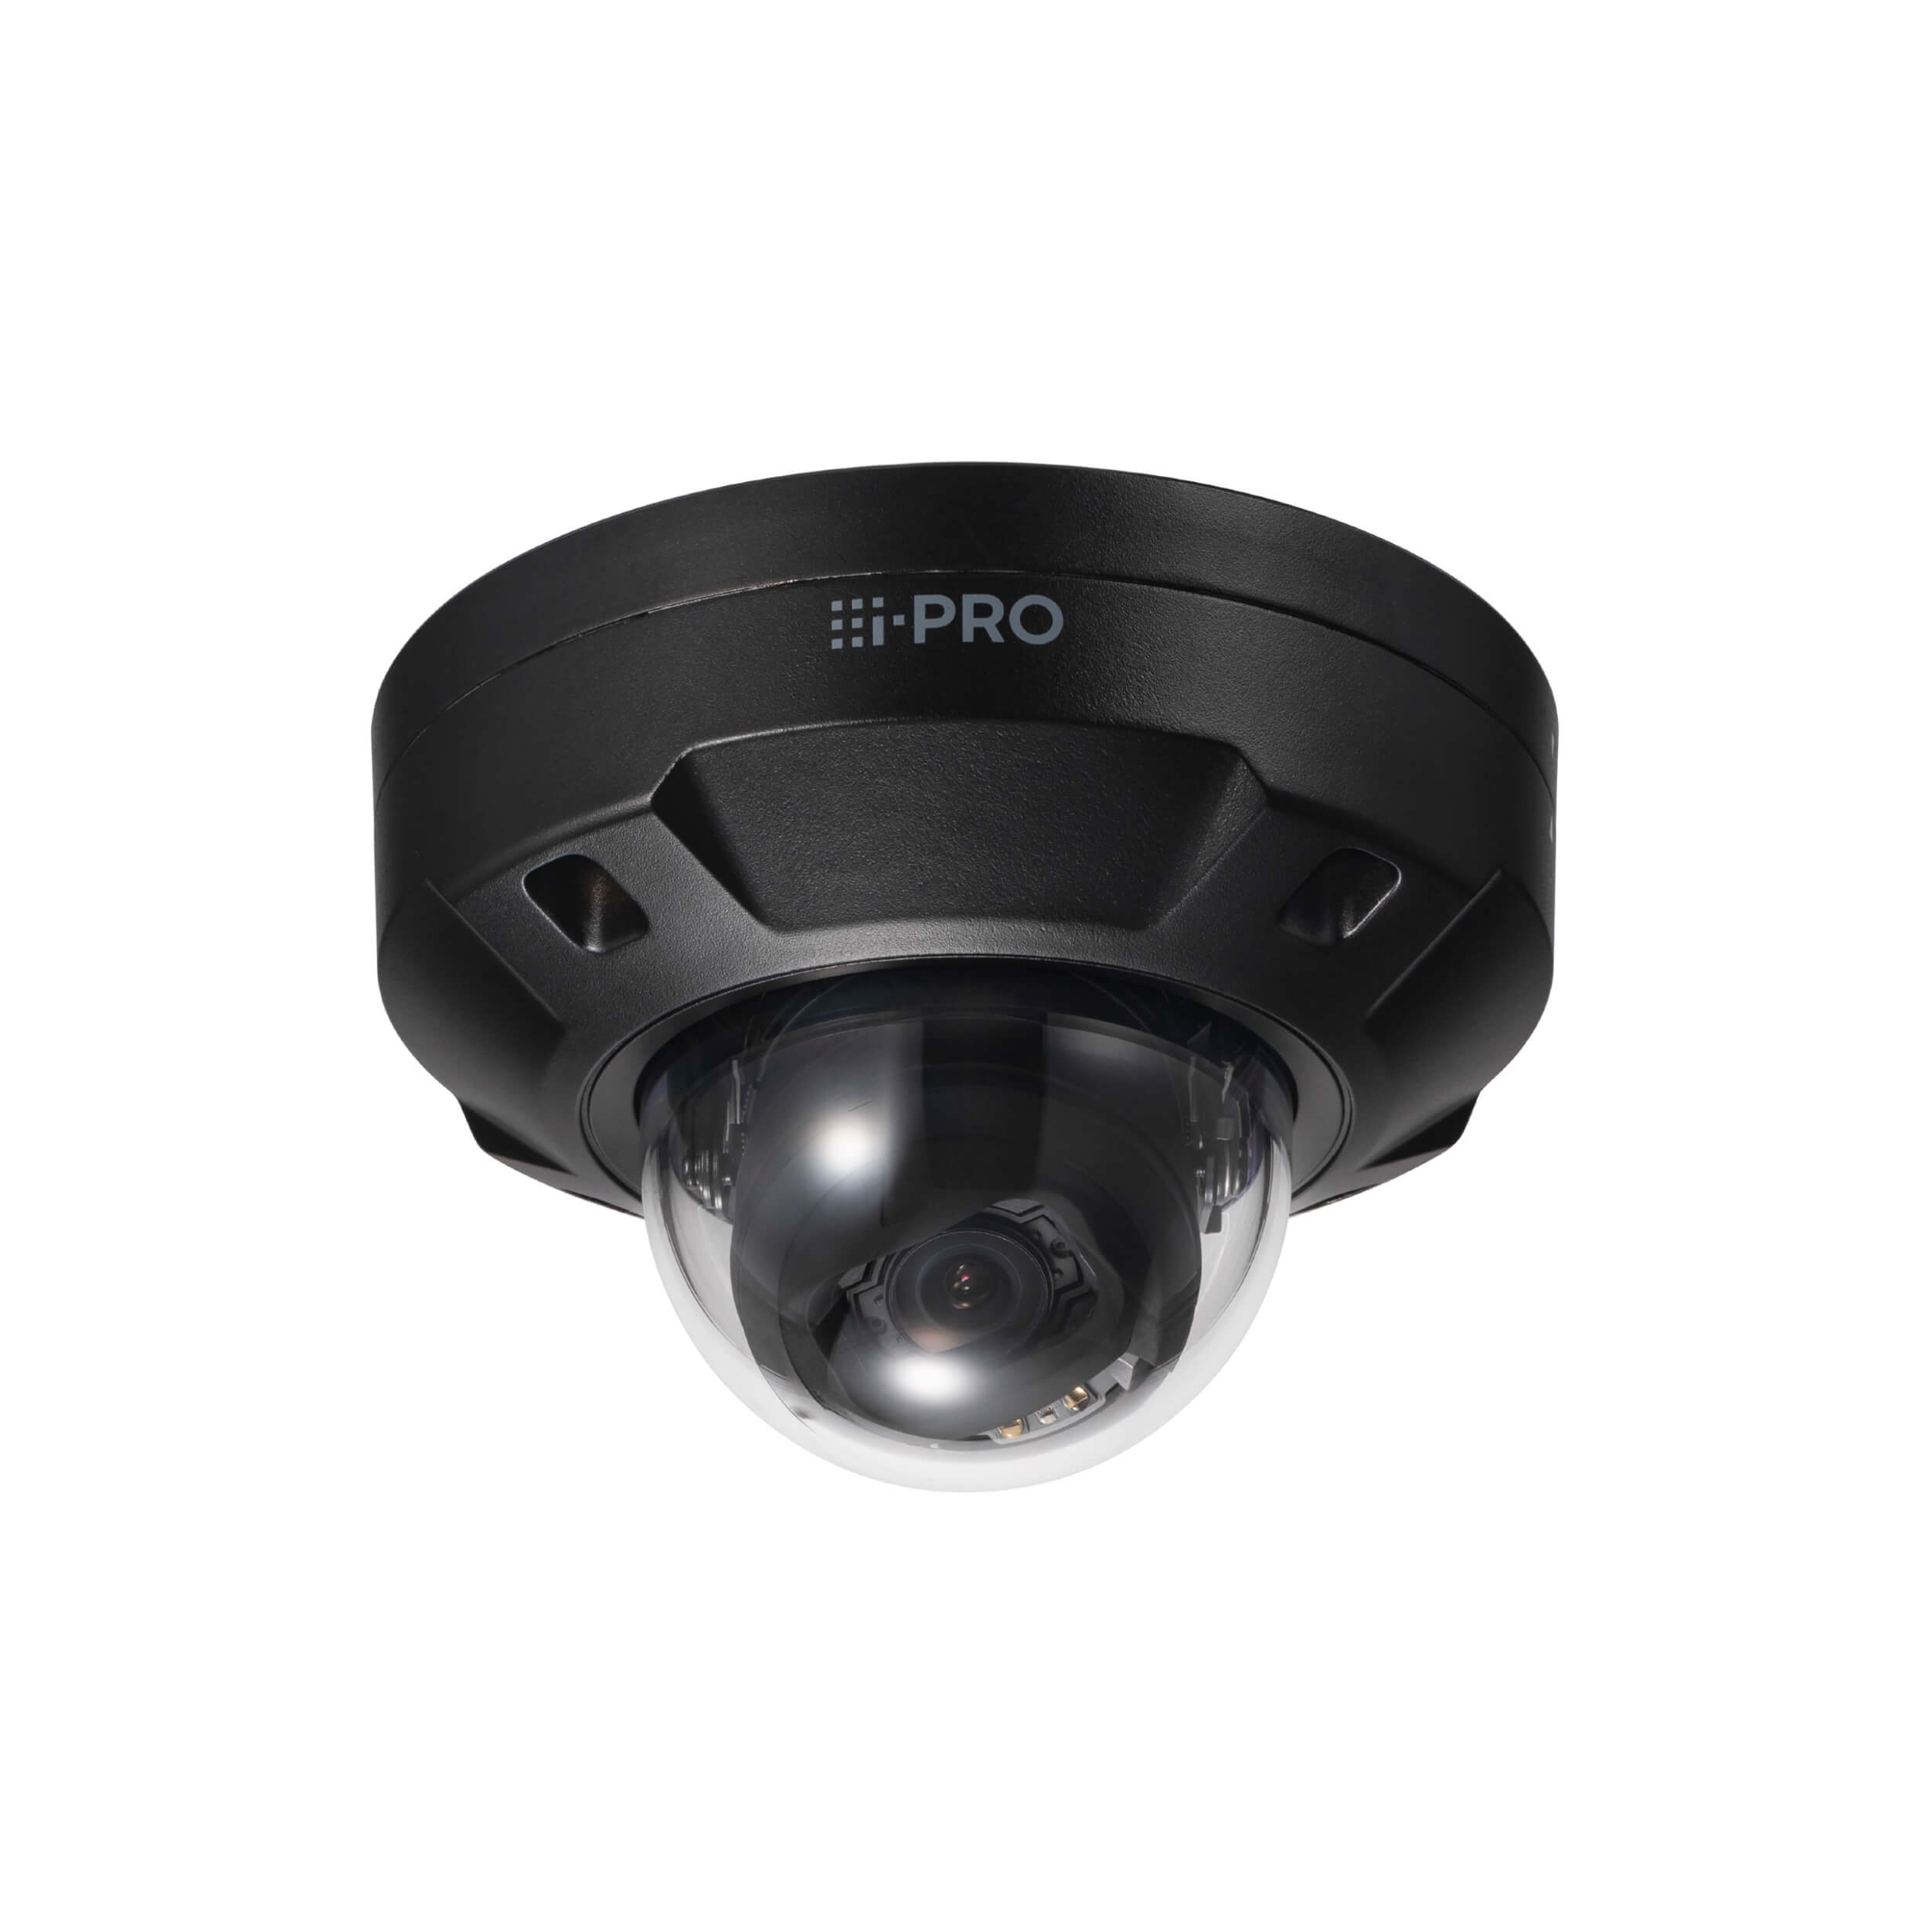 Panasonic WV-S25500-V3LN1 5MP Vandal Resistant Outdoor Dome Network Camera with AI Engine with 2.9-9mm Lens